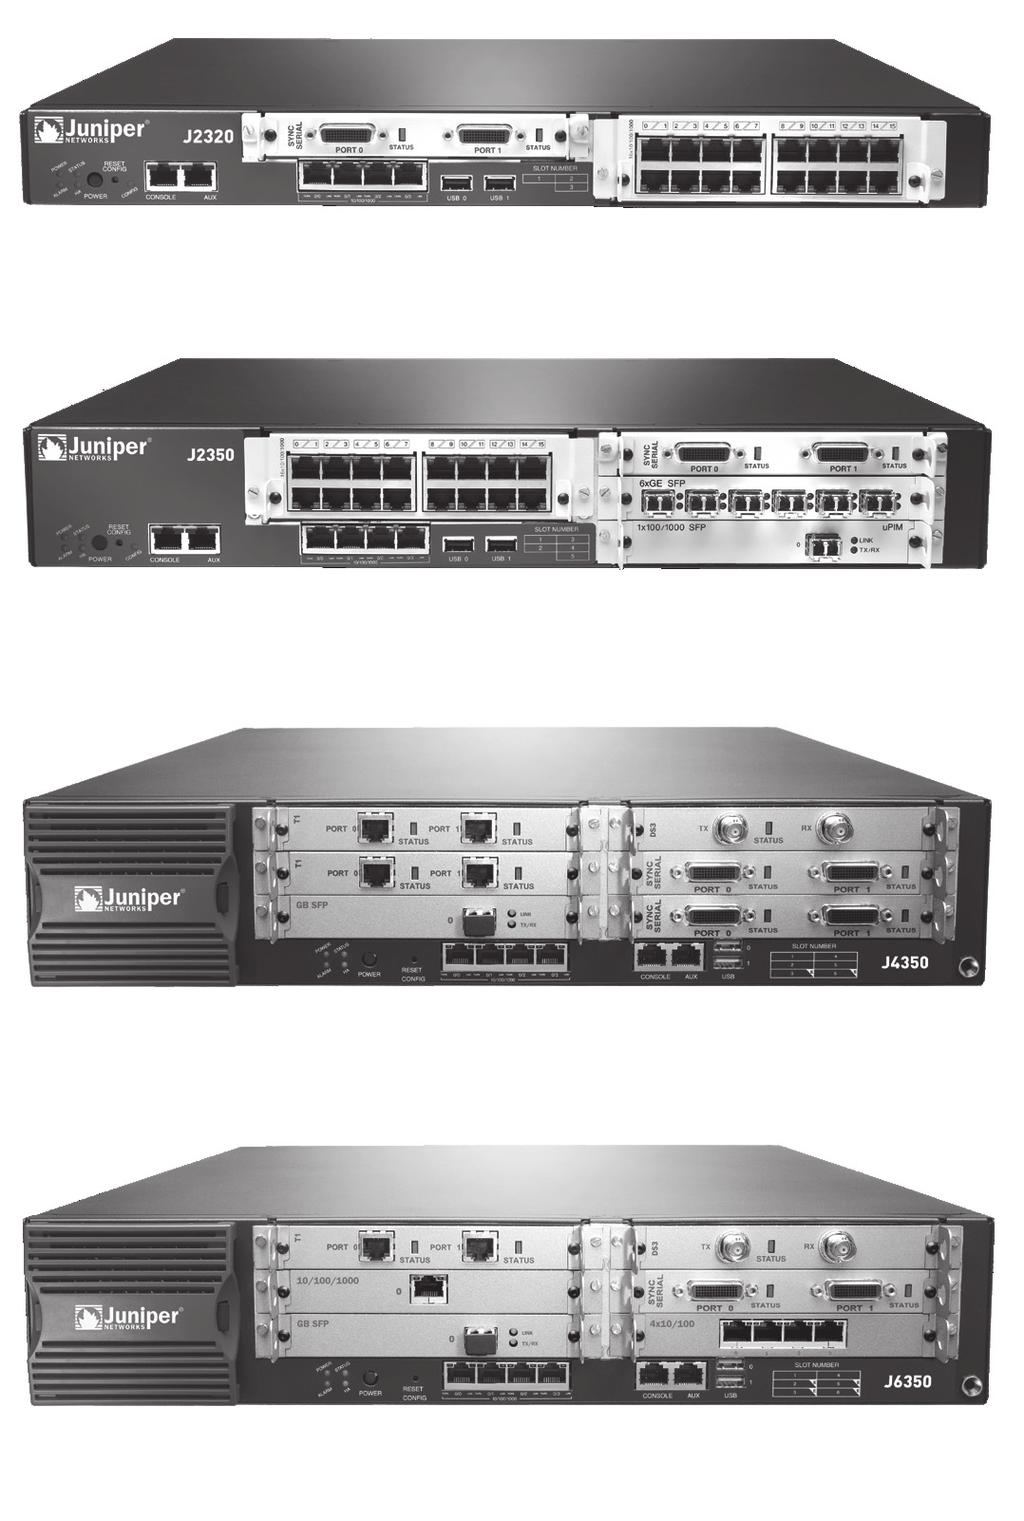 J Series Services Routers J2320 J2350 J4350 Juniper Networks J Series routers provide up to Gigabit Ethernet performance for enterprise remote, branch, and regional offices.